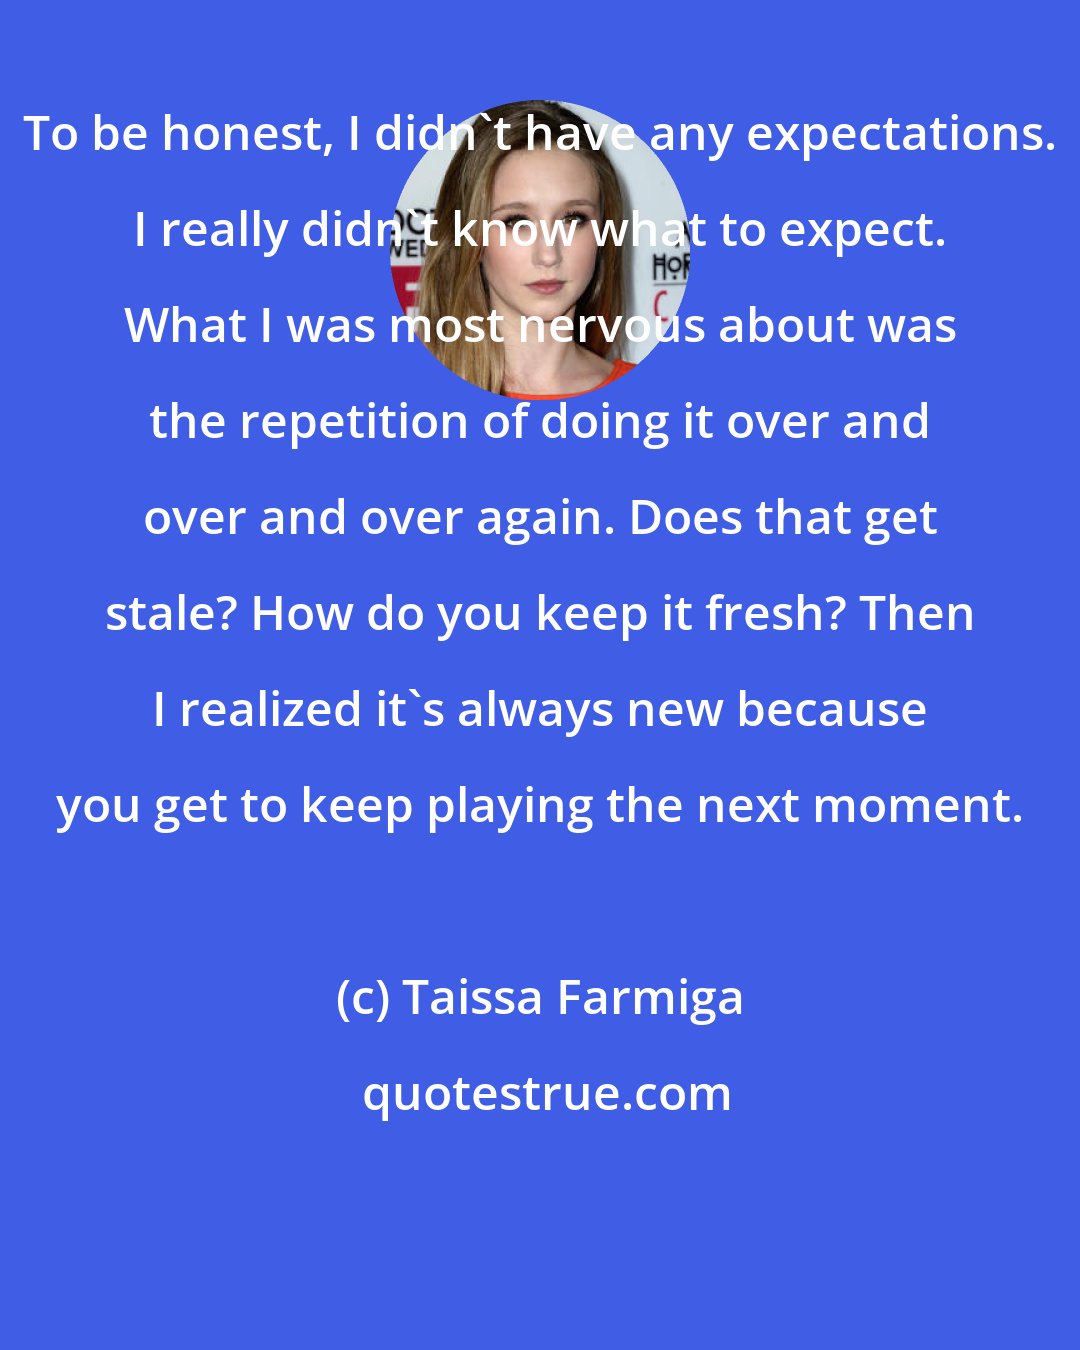 Taissa Farmiga: To be honest, I didn't have any expectations. I really didn't know what to expect. What I was most nervous about was the repetition of doing it over and over and over again. Does that get stale? How do you keep it fresh? Then I realized it's always new because you get to keep playing the next moment.